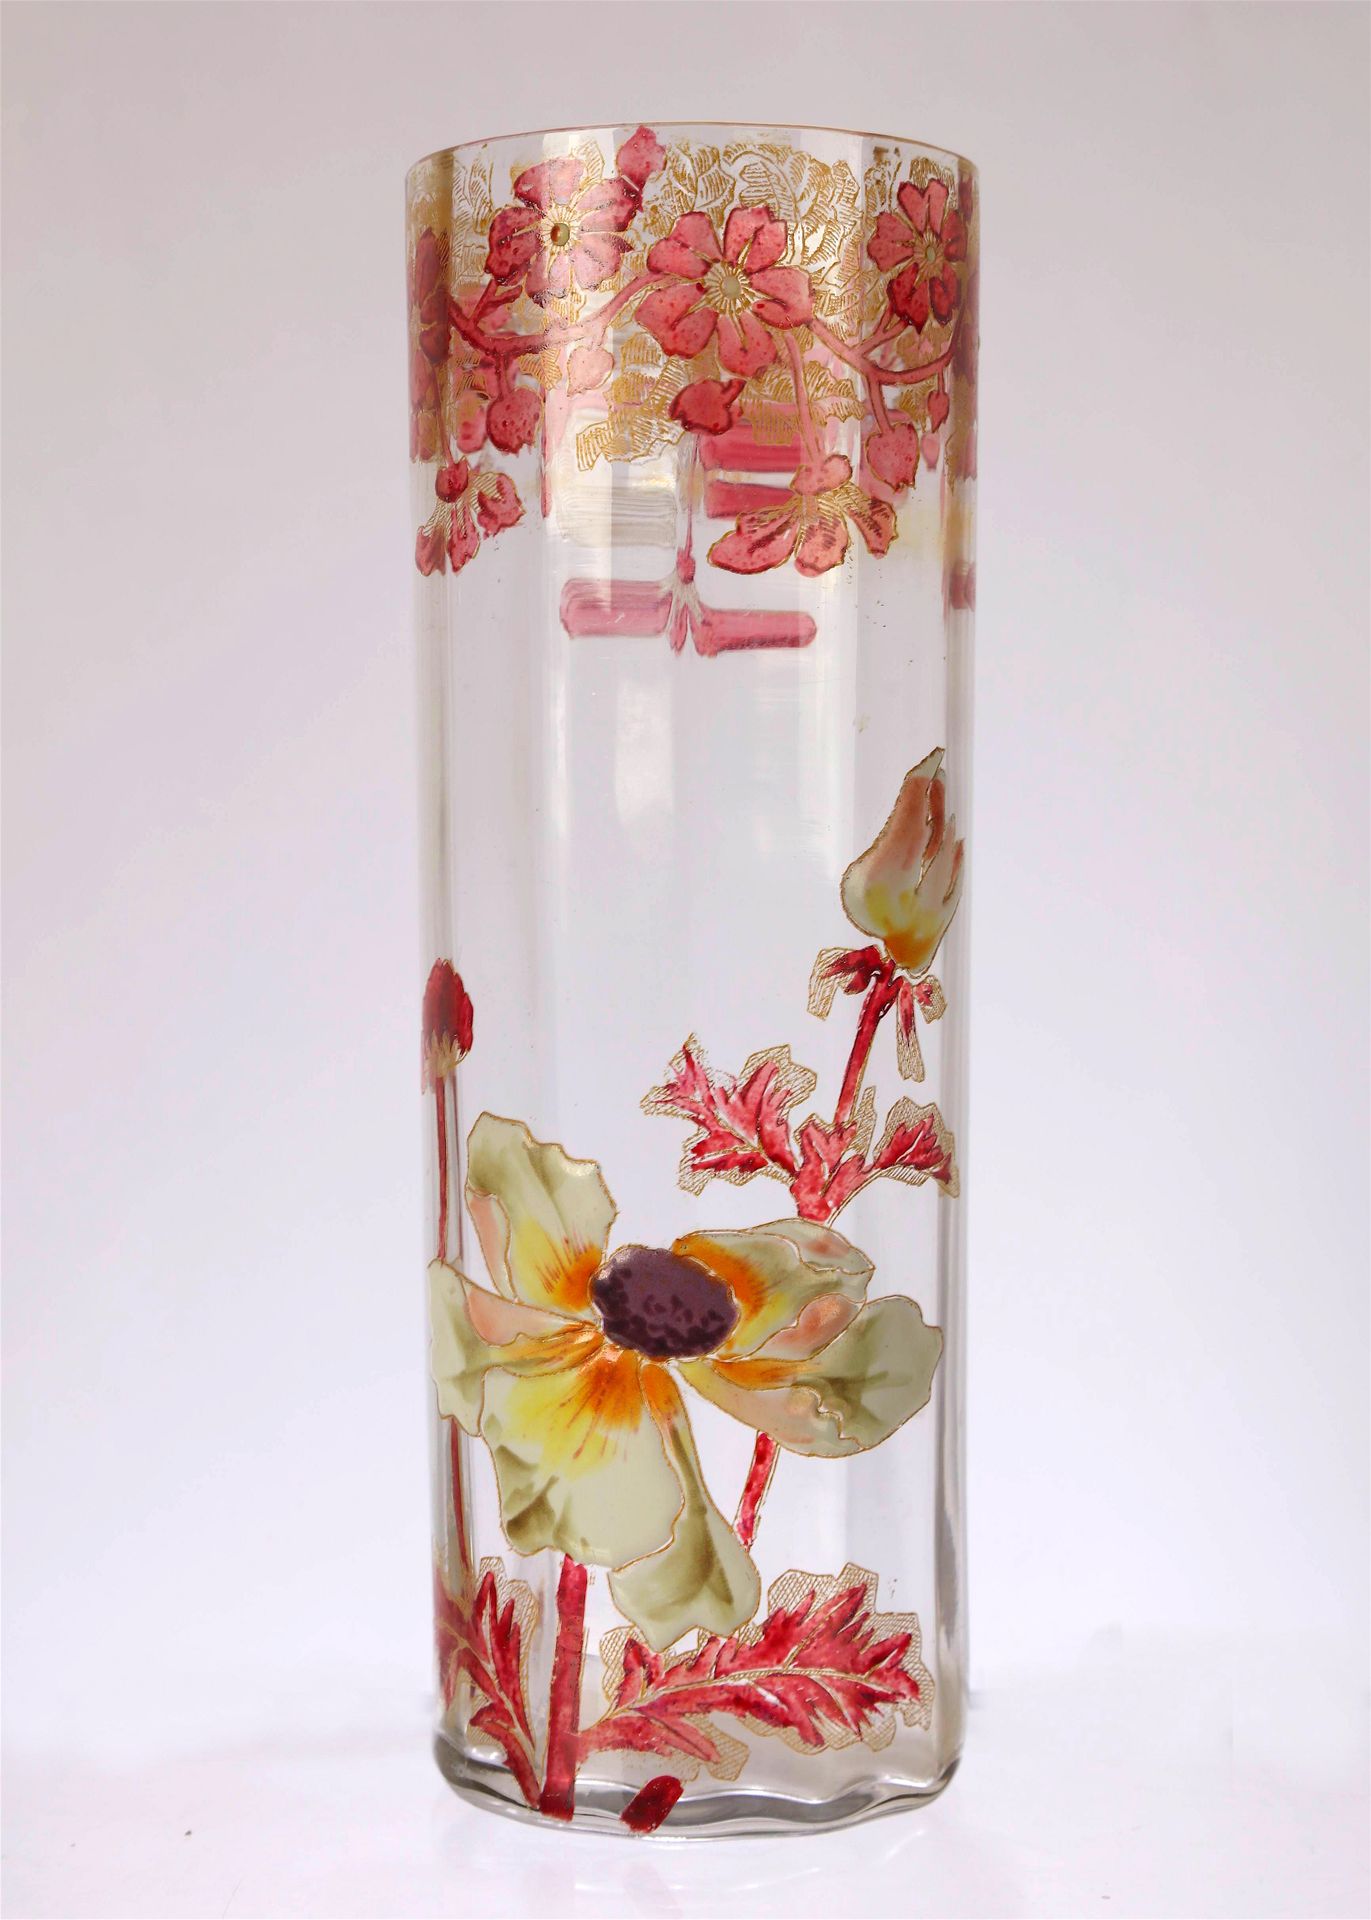 Null Glass vase of roll form, enamelled floral decoration, around 1900. 20 cm